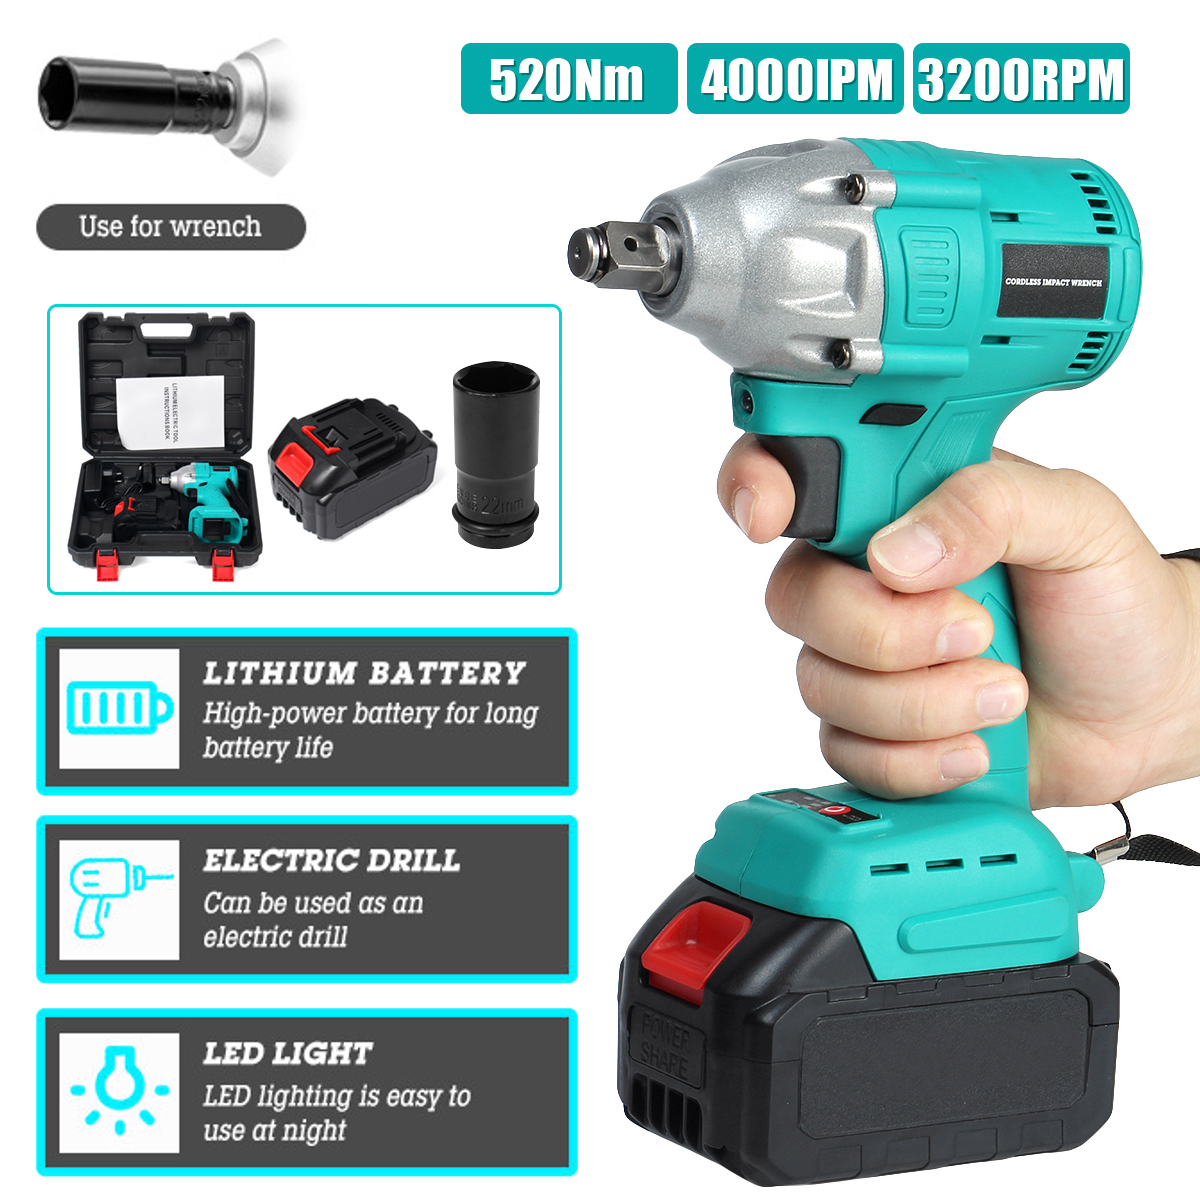 520NM-Cordless-Electric-Wrench-EUUSAU-Plug-Power-Wrench-With-Li-ion-Battery-WSleeve-Also-For-Makita--1834509-4